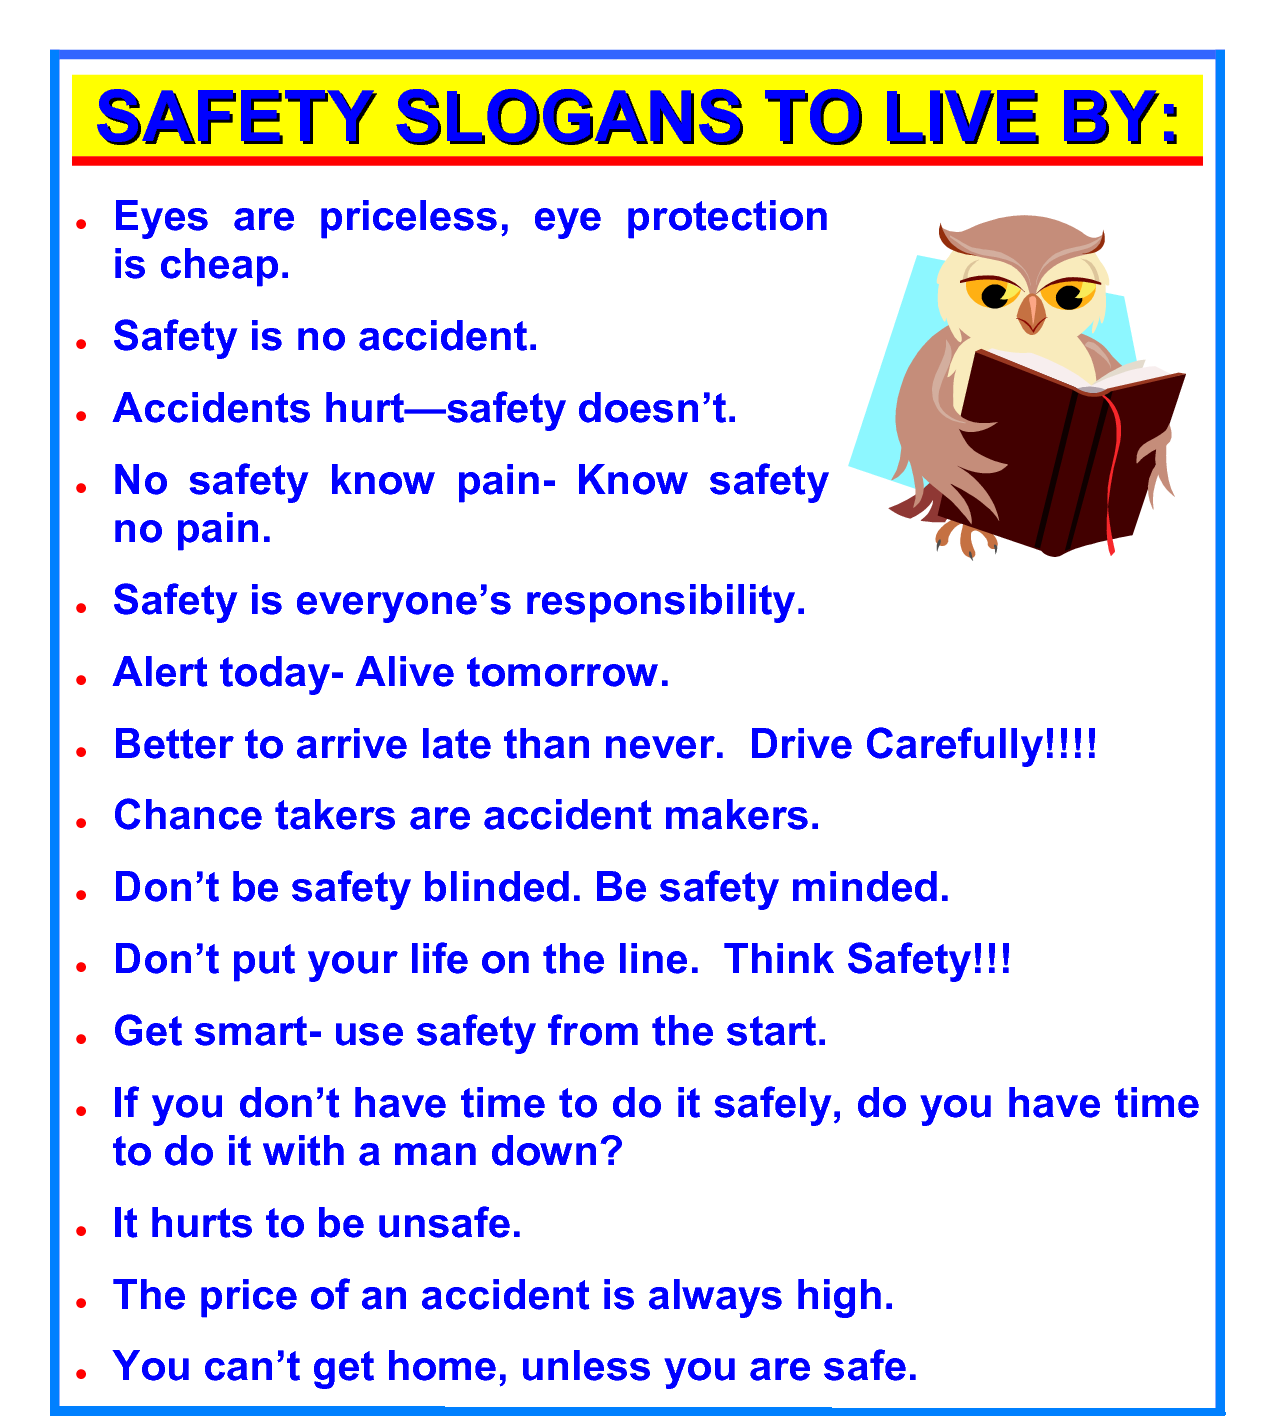 Totalsafety Safety Slogan